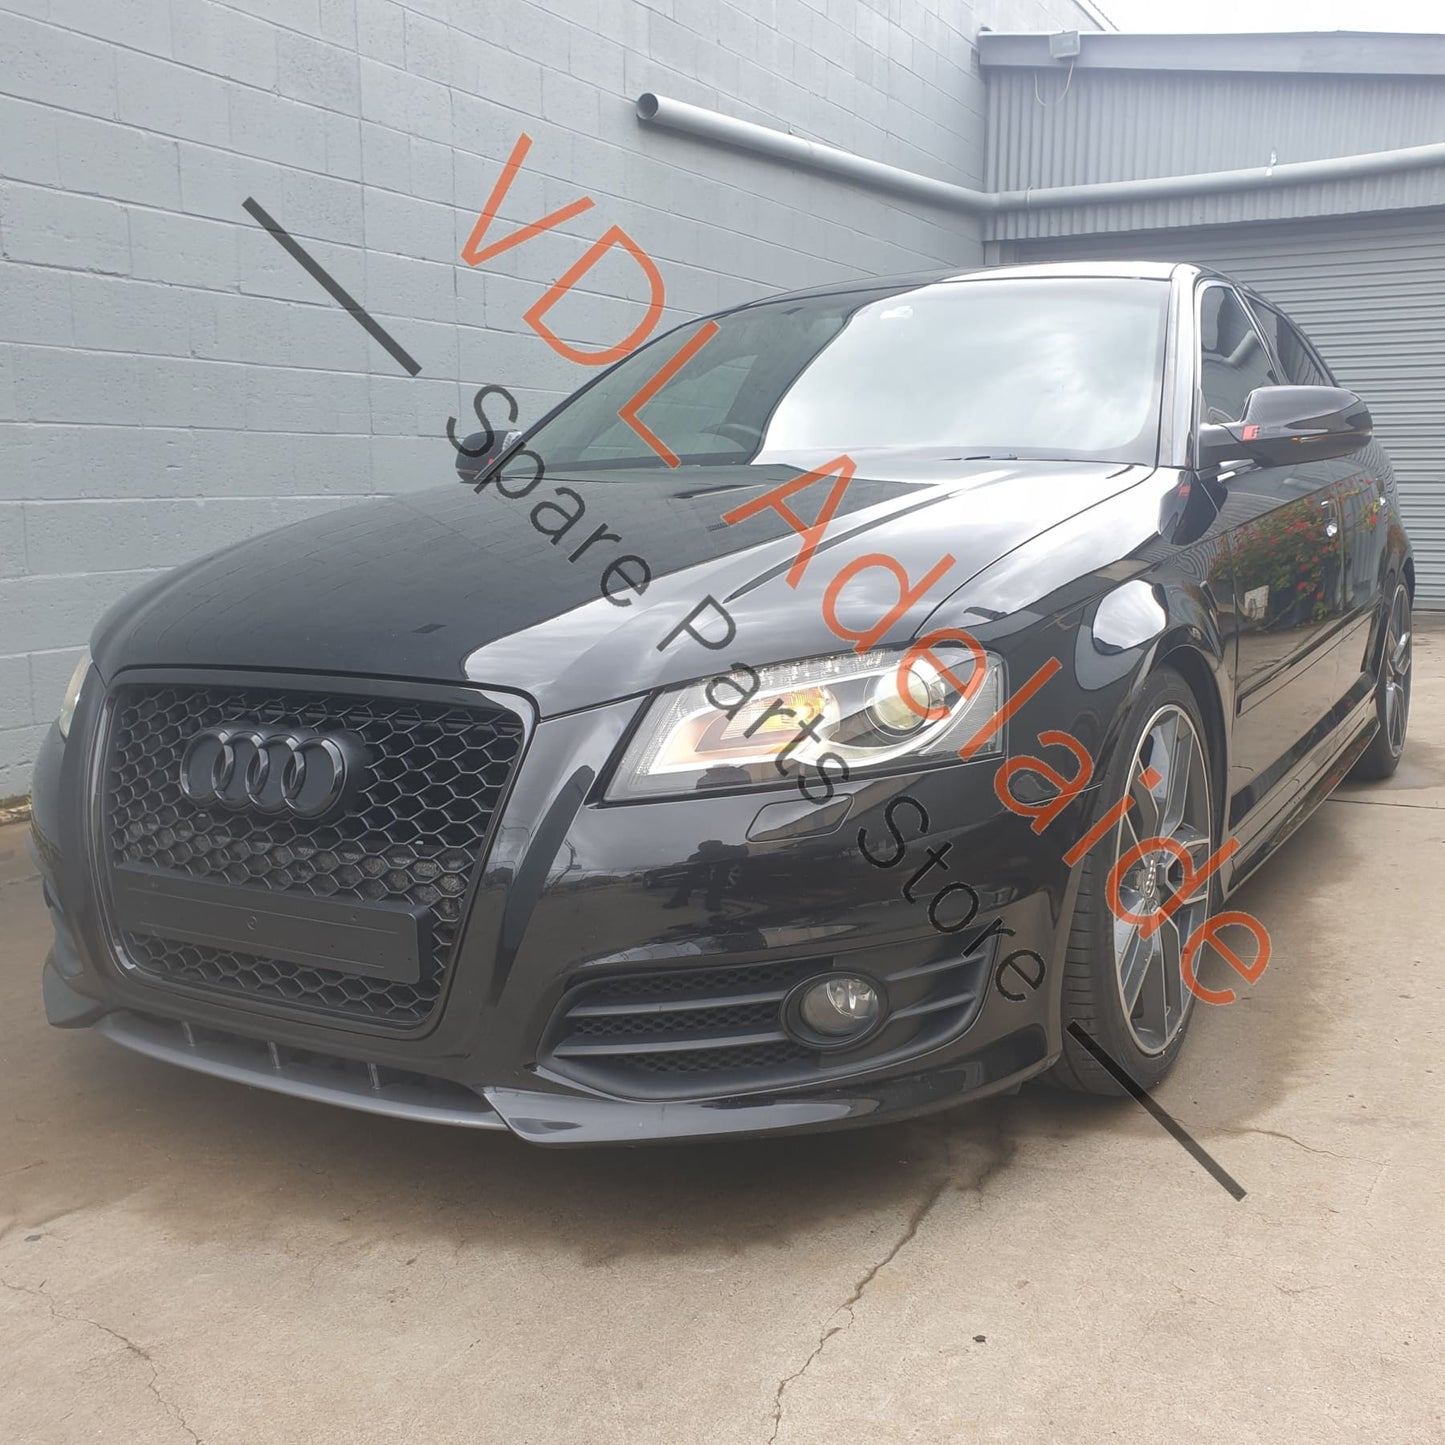 8P0941029BF 8K0941597E Audi A3 S3 8P Left Headlight Bi Xenon w LED for RHD 8P0941029BF